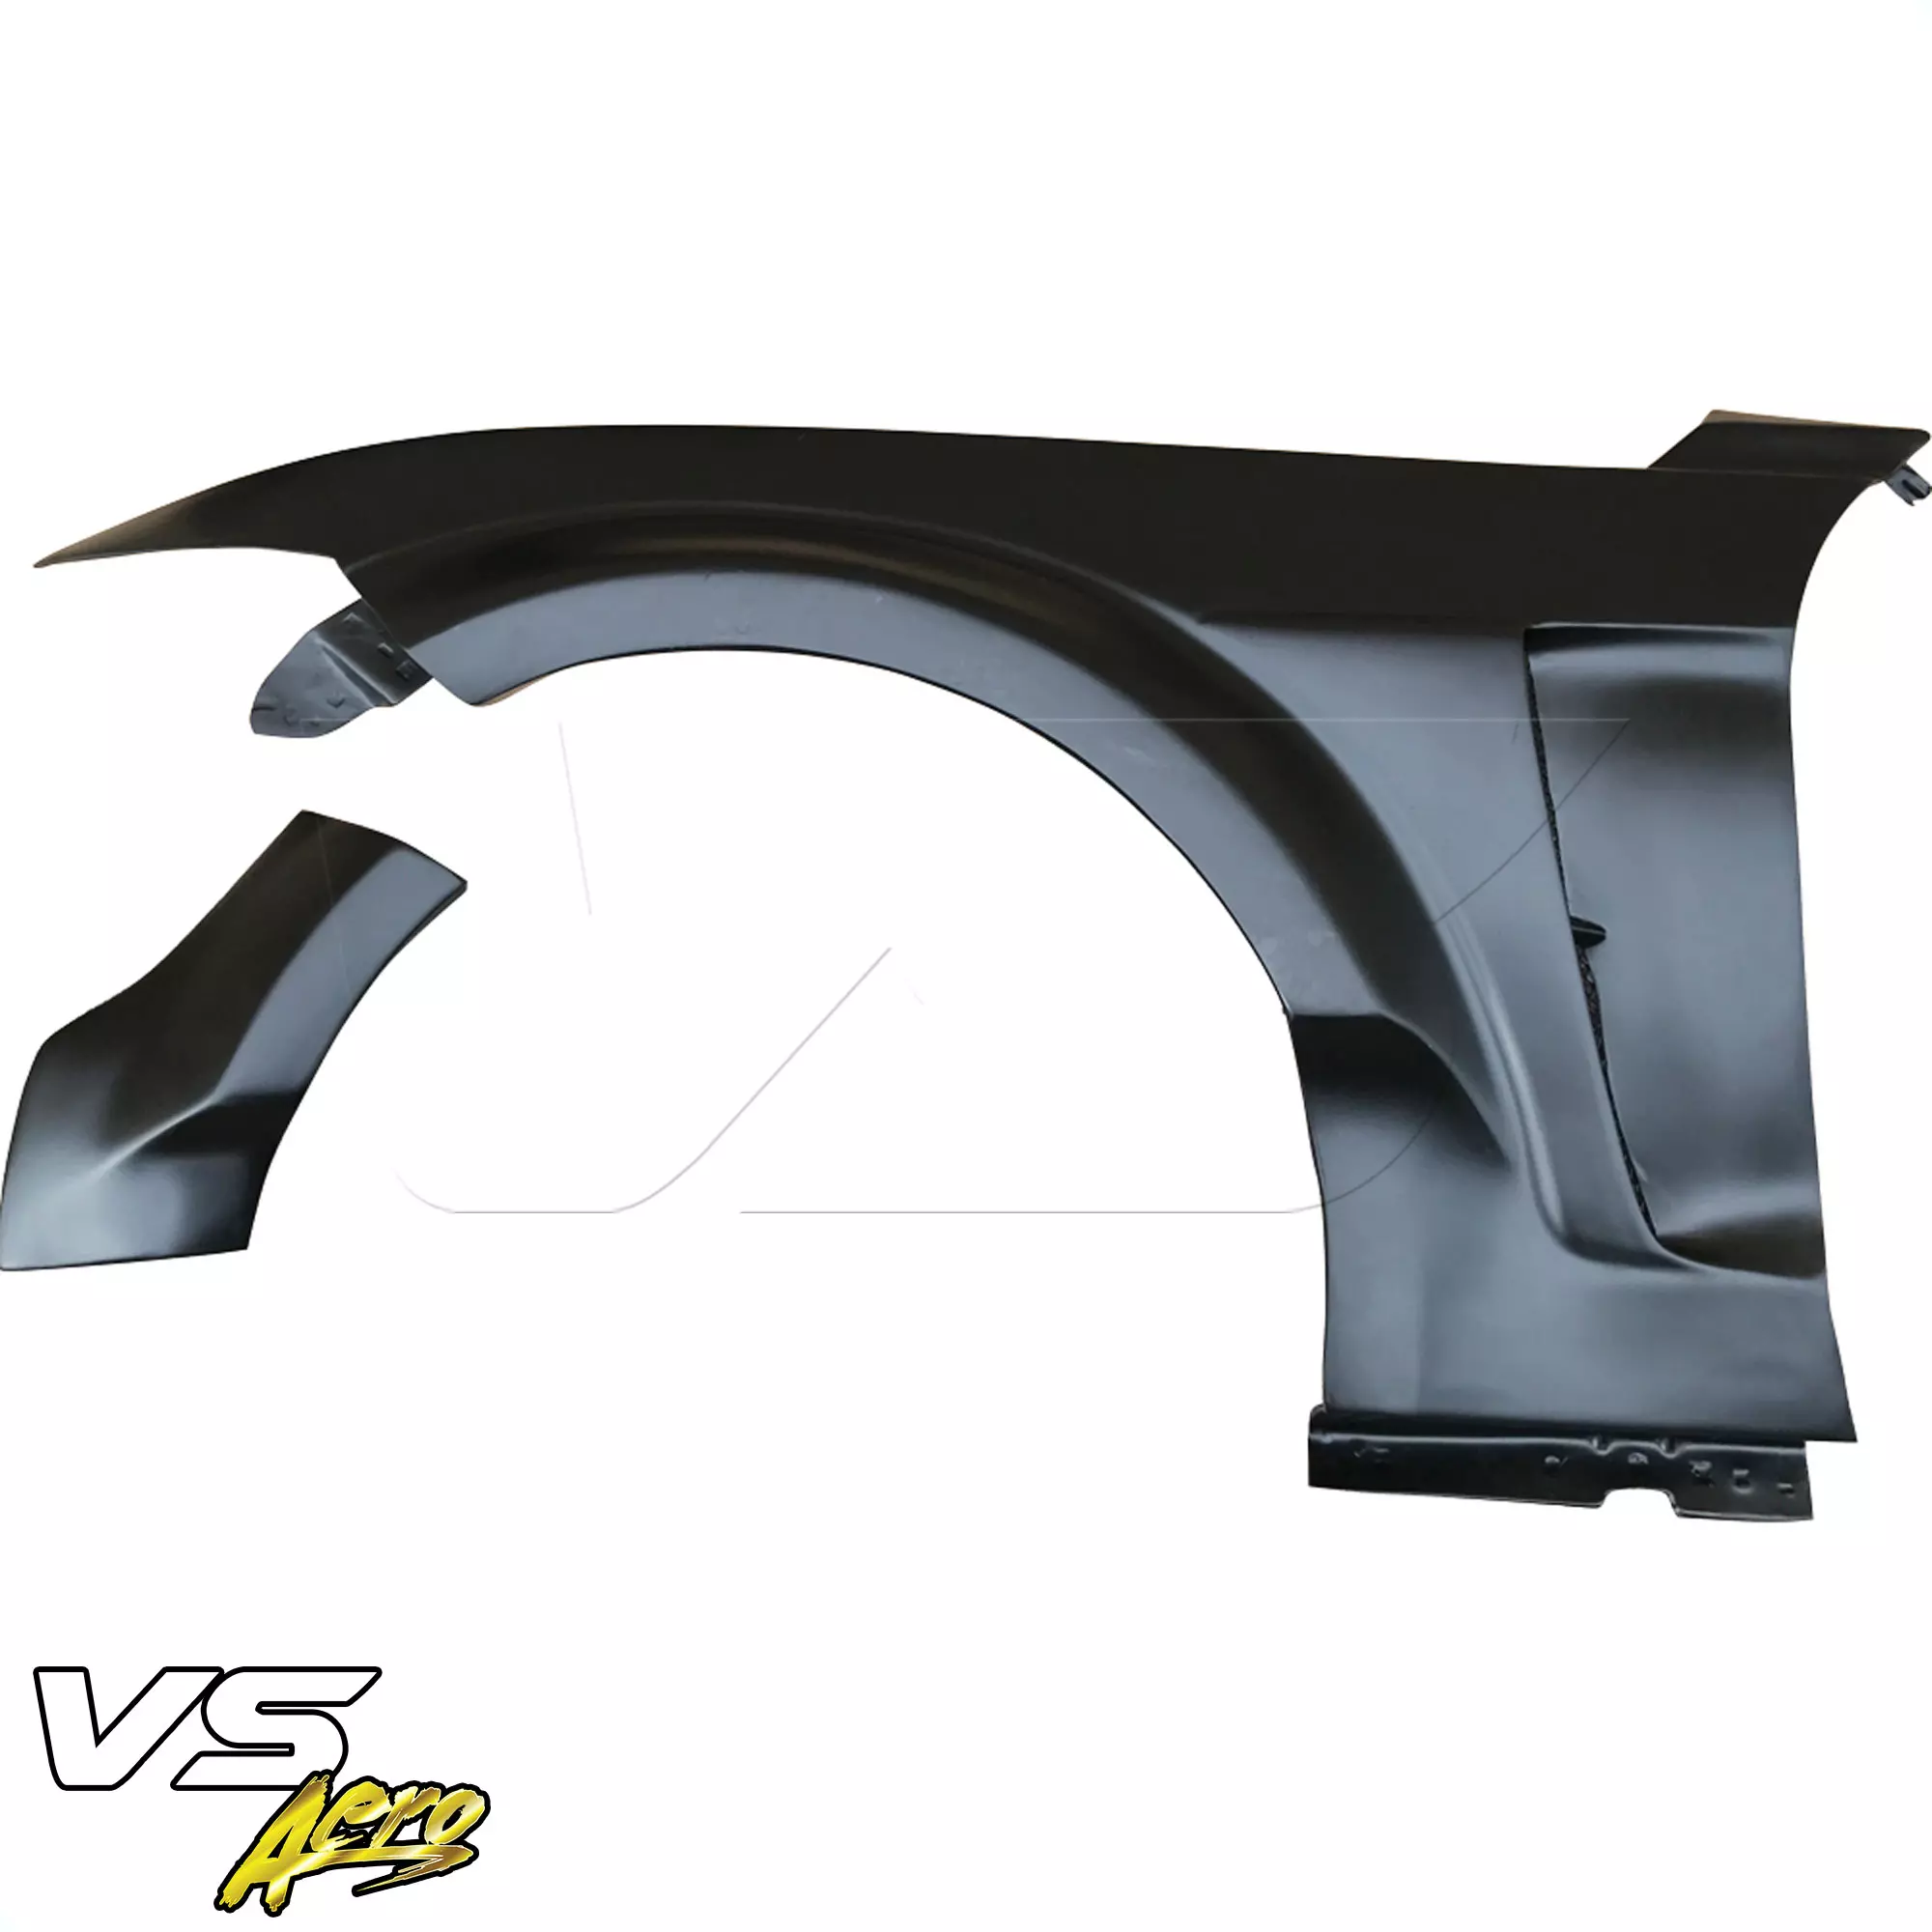 VSaero FRP KTOT Wide Body Fenders (front) > Ford Mustang 2015-2020 - Image 21